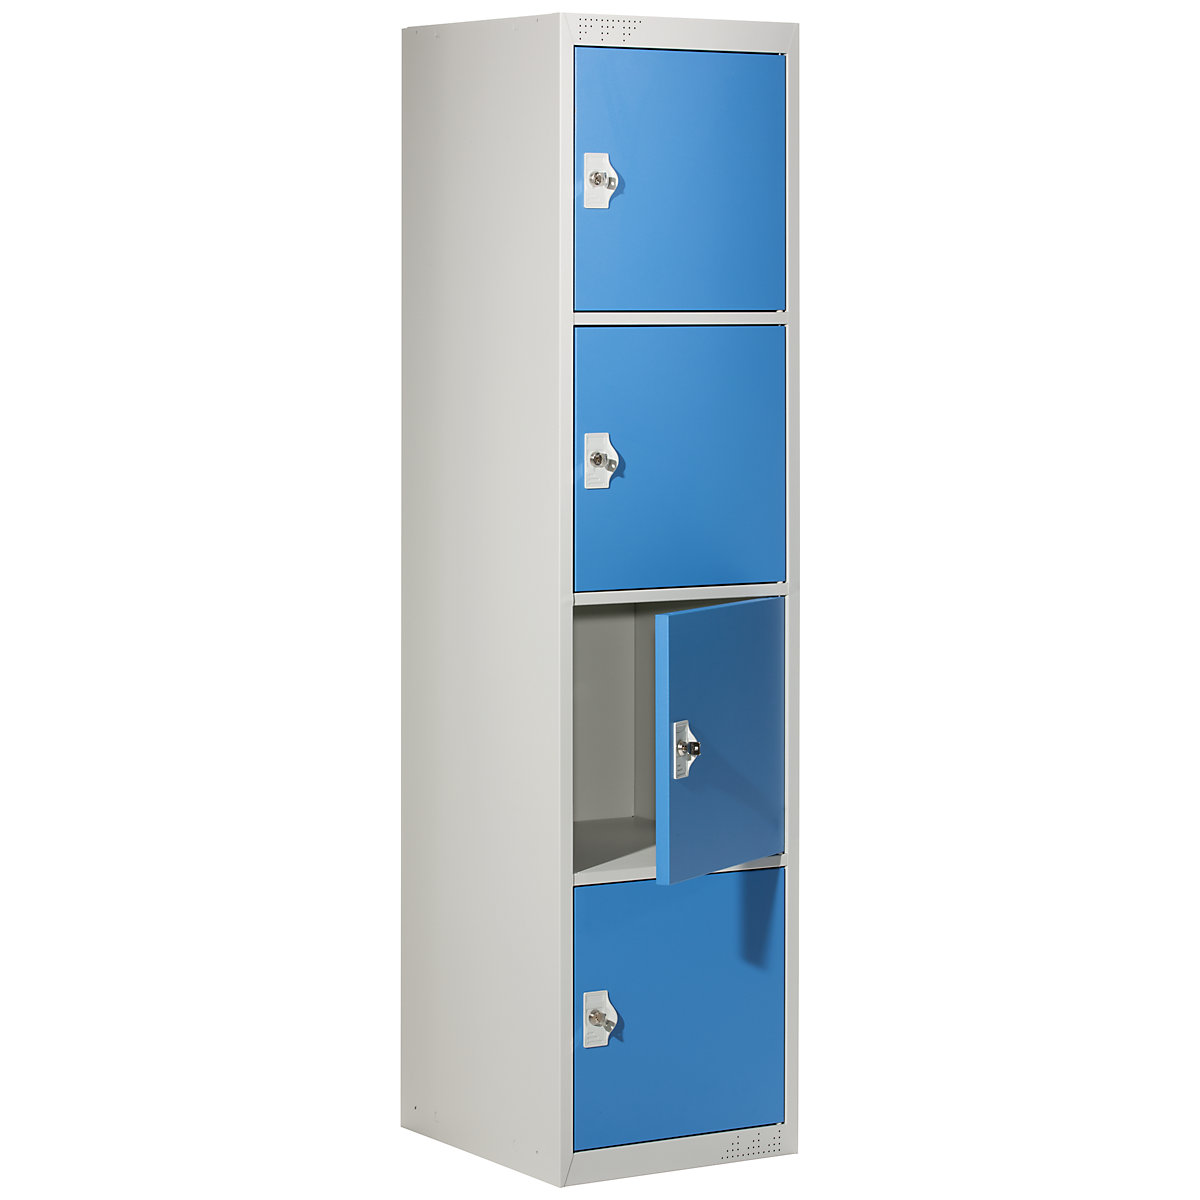 Clothes locker with 4 individual lockers